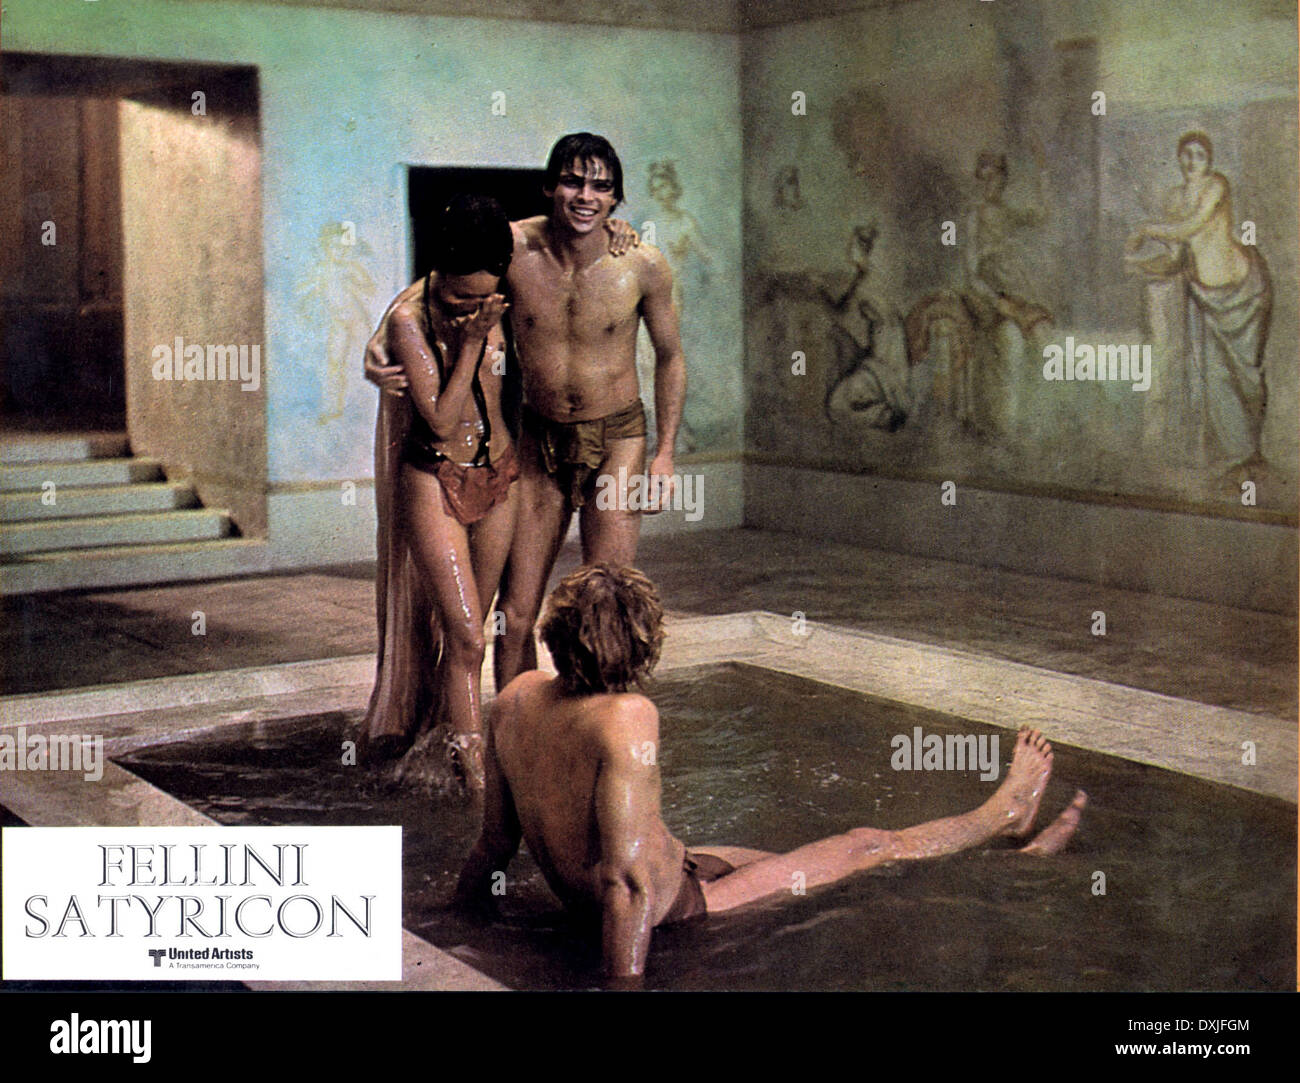 FELLINI SATYRICON (IT/FR 1969) MARTIN POTTER assis, HYLETT Banque D'Images